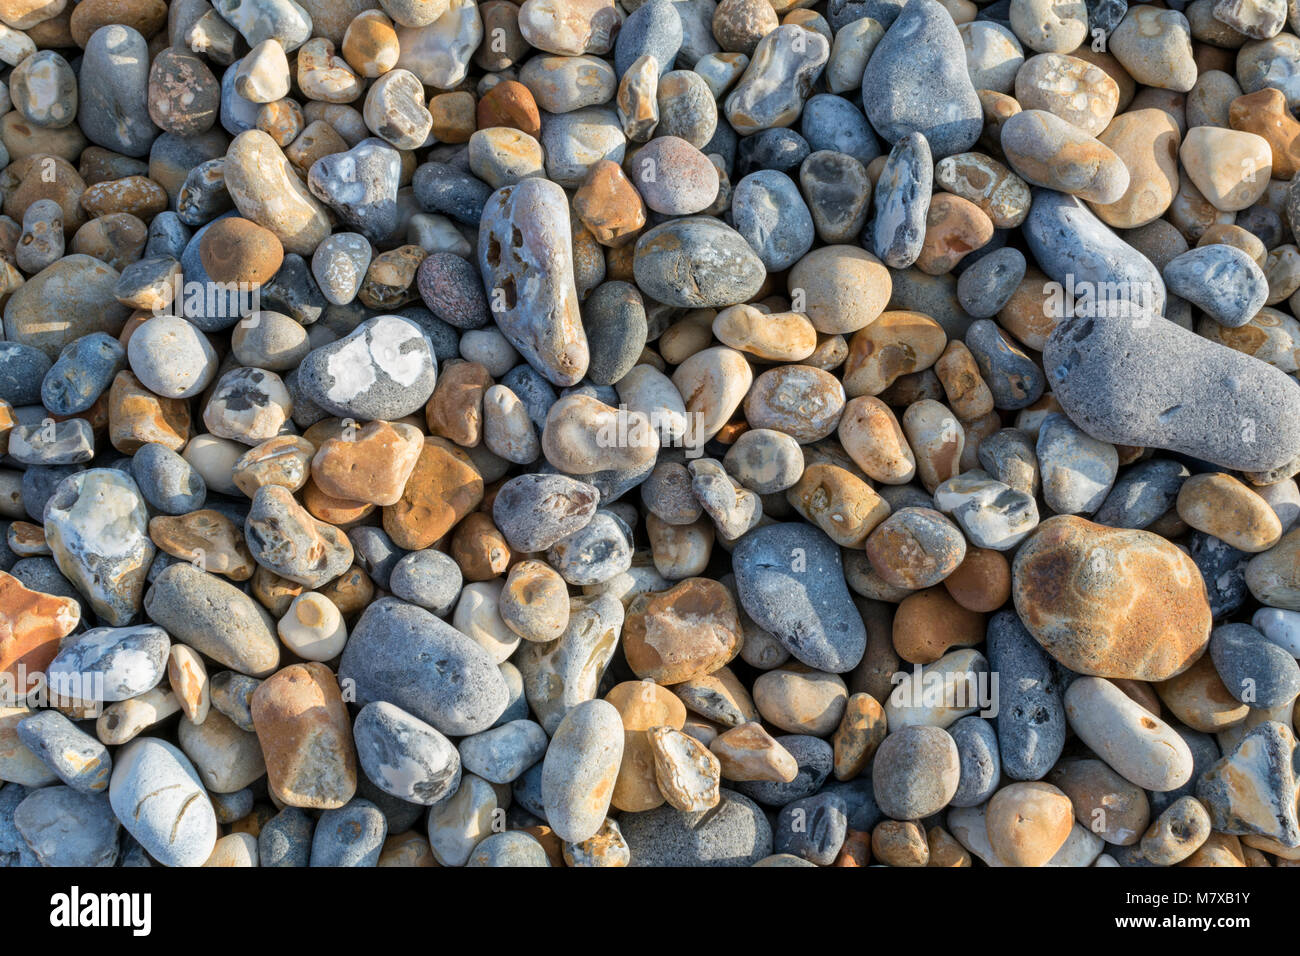 Close-up of shingle on the beach at Bexhill-on-Sea with a mix of grey, ochre and bluey-white pebbles of different sizes Stock Photo